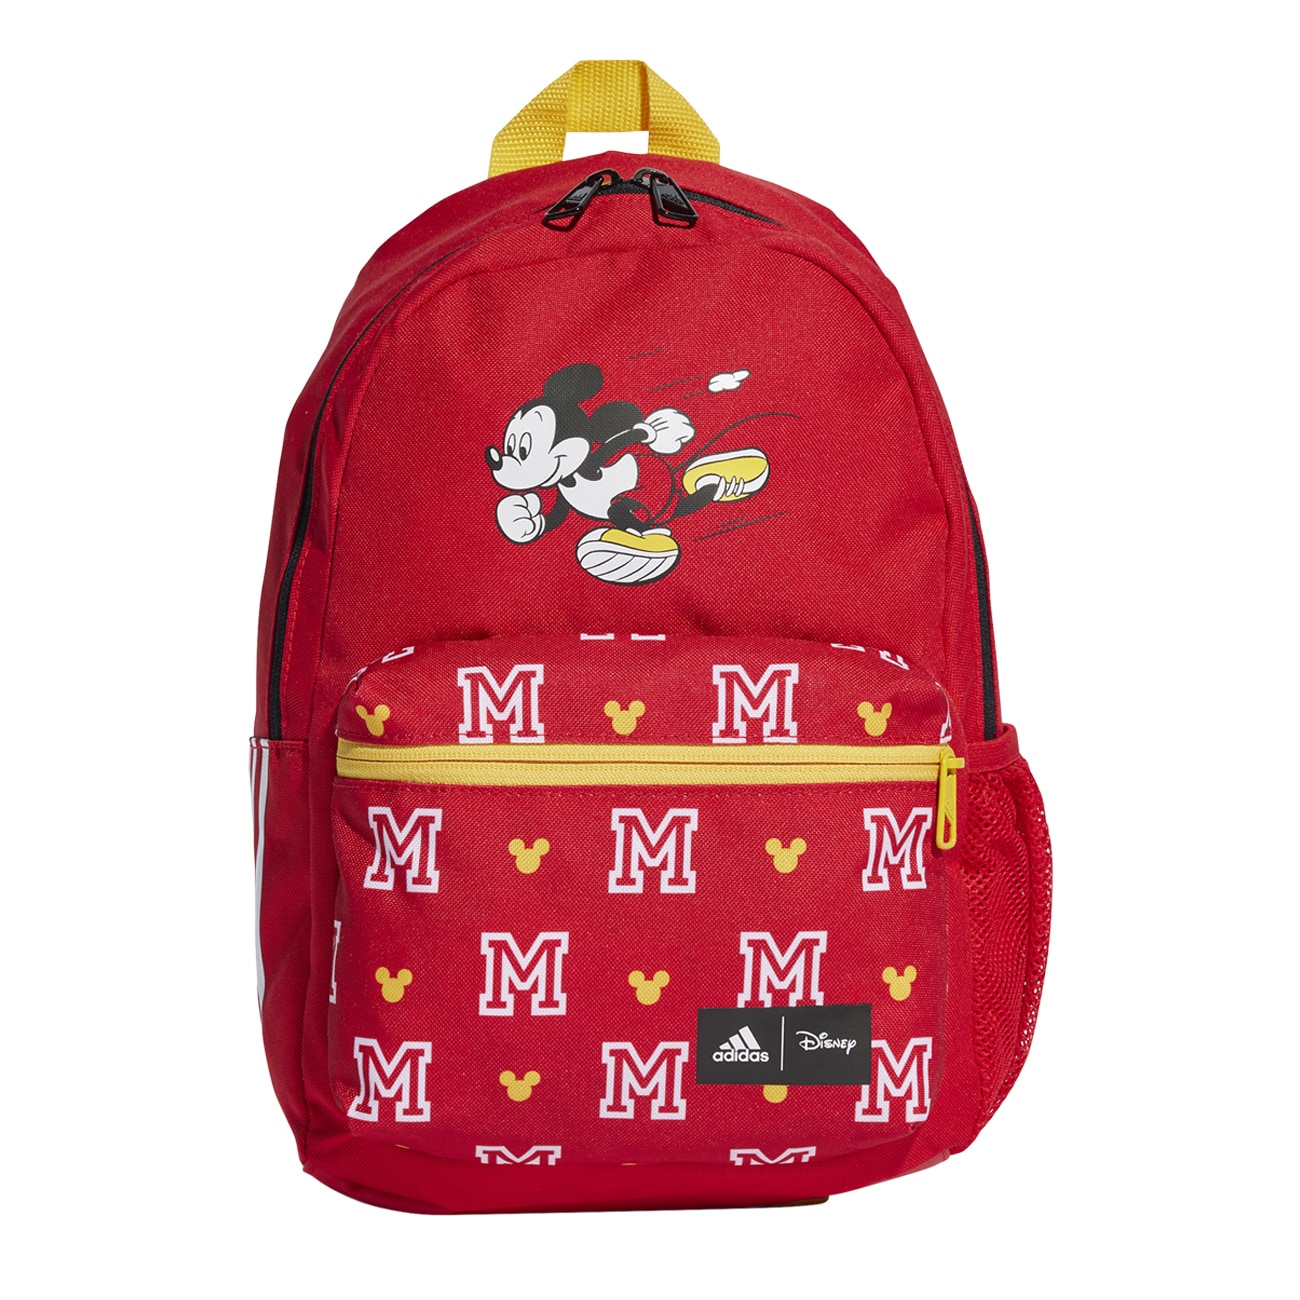 adidas Disney's Mickey Mouse Backpack - White, Kids' Training